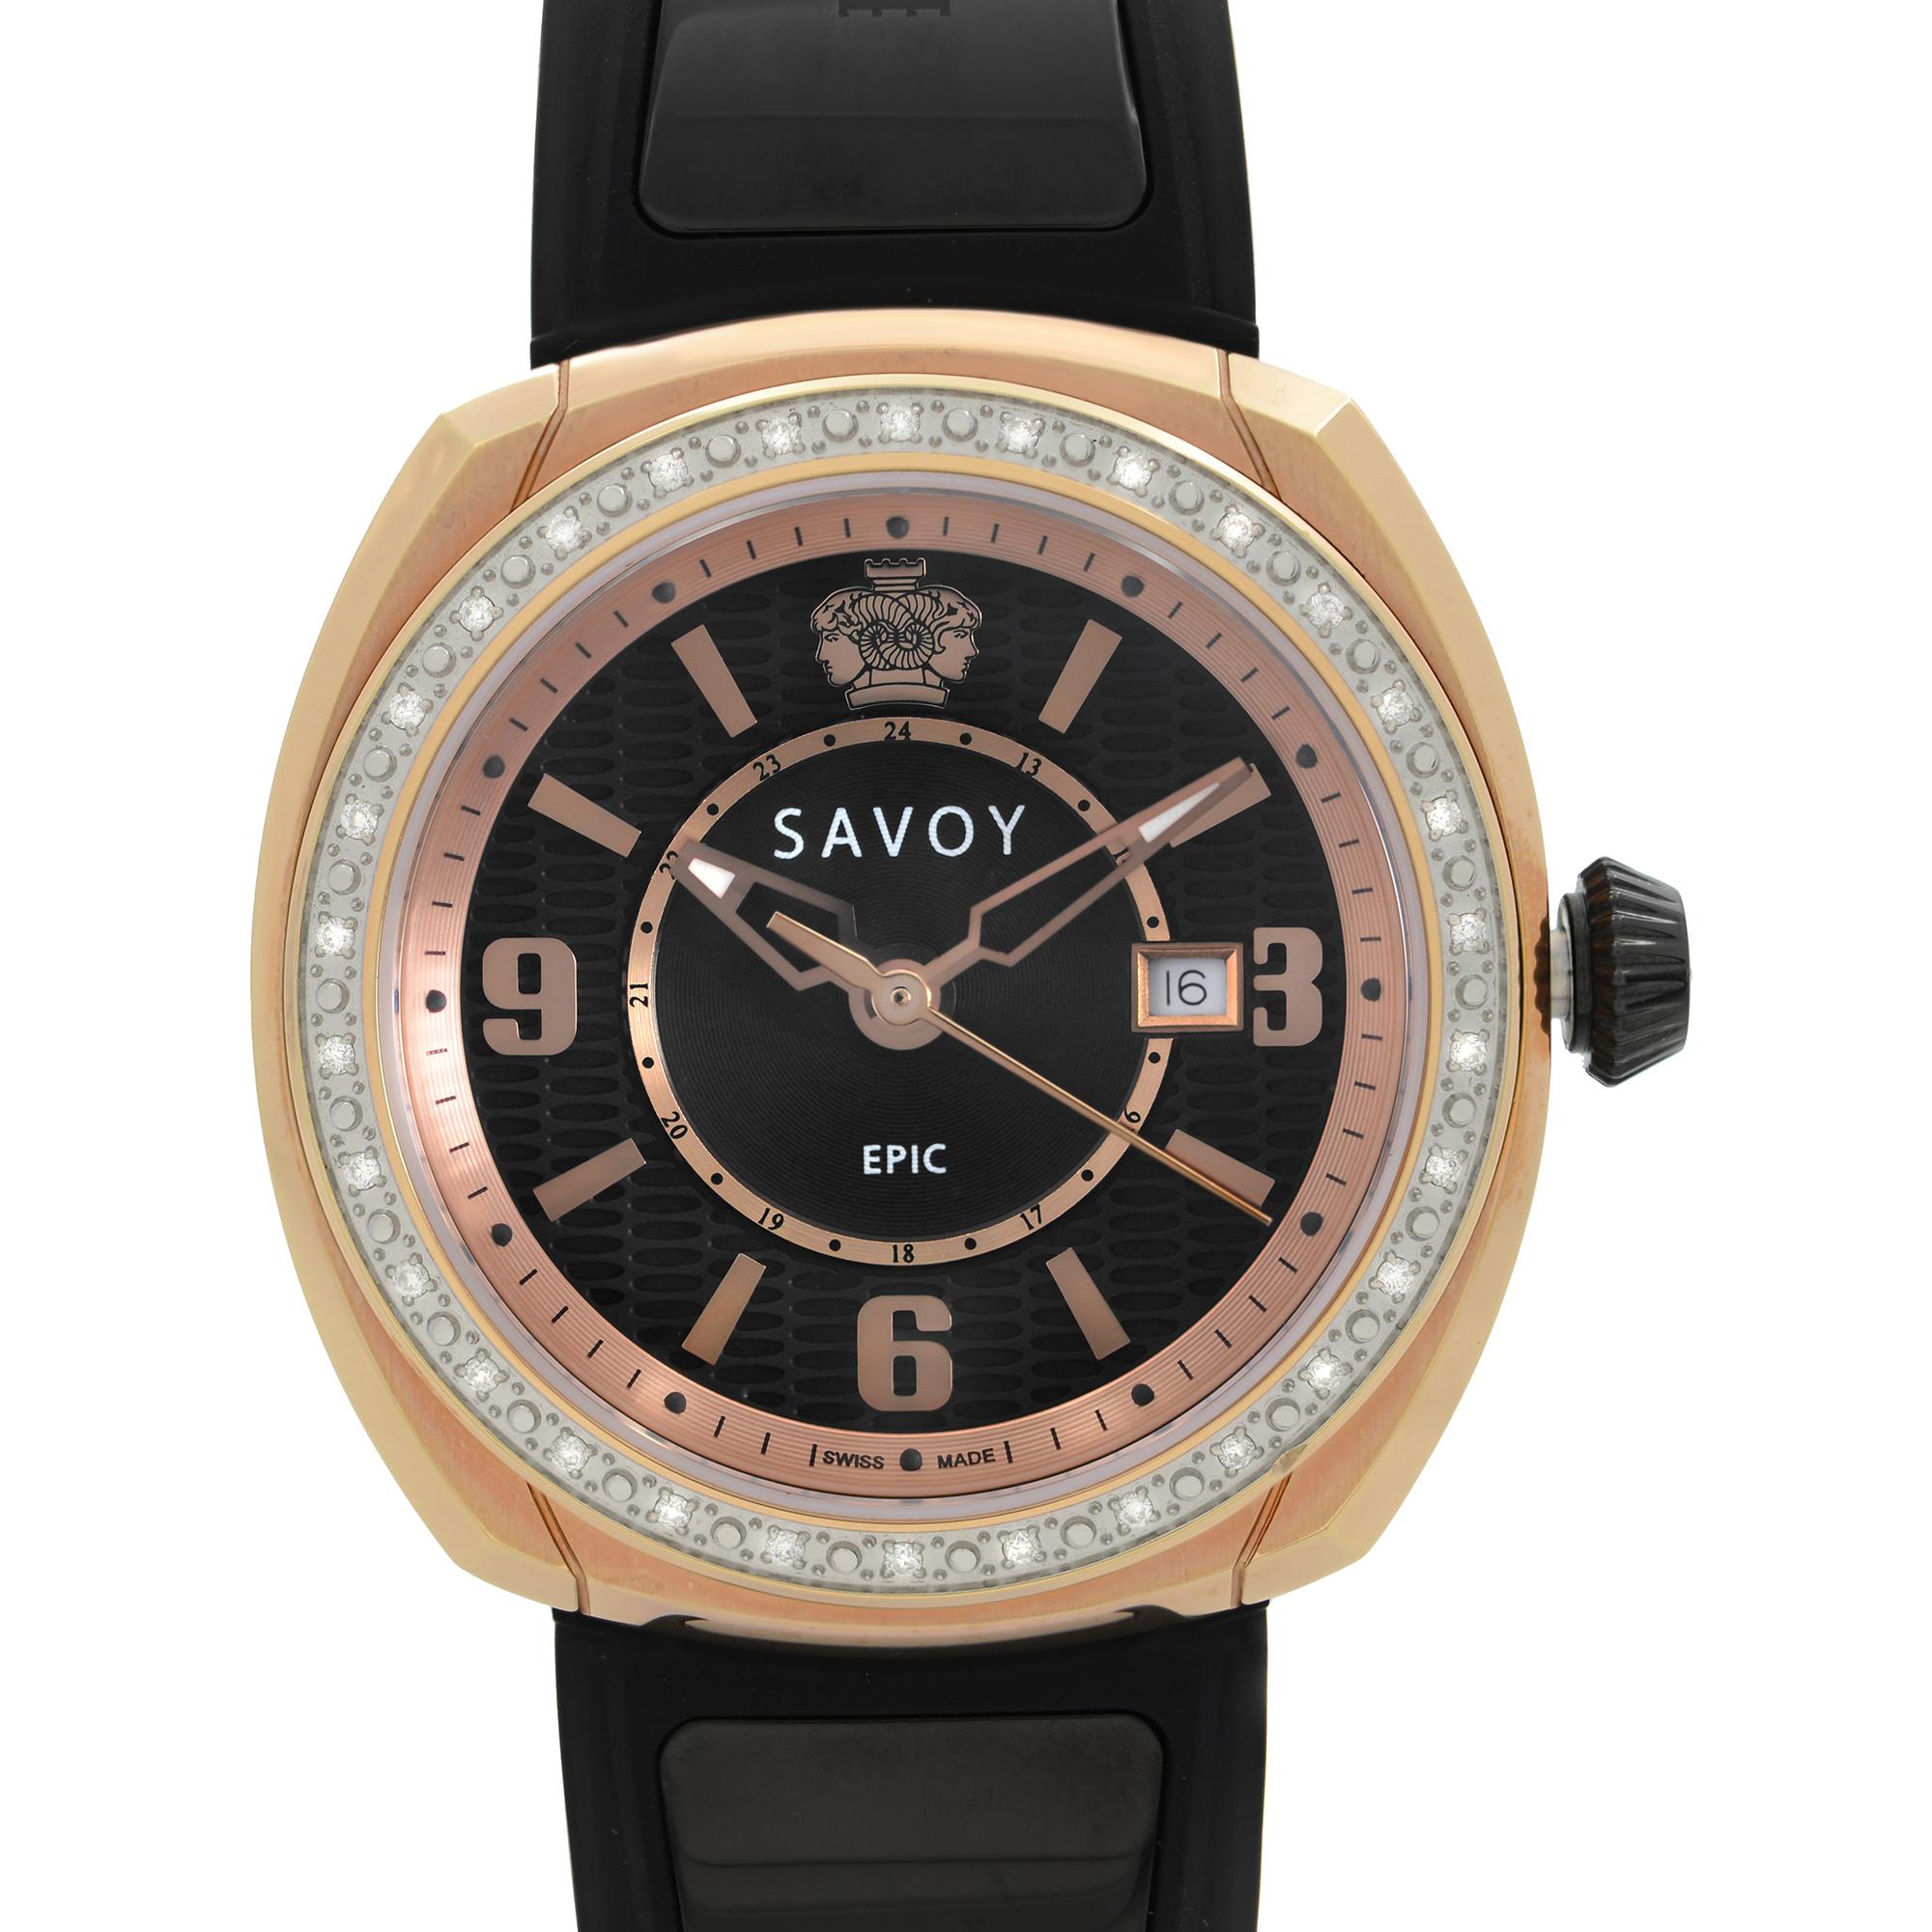 New with Defects Savoy Epic Ladies Watch G4004J.02A.RB04. The Watch Has a few Insignificant Minor Nicks on the Case. This Beautiful Timepiece is Powered by Quartz (Battery) Movement And Features: Rose Gold-Tone Stainless Steel Case with a Black